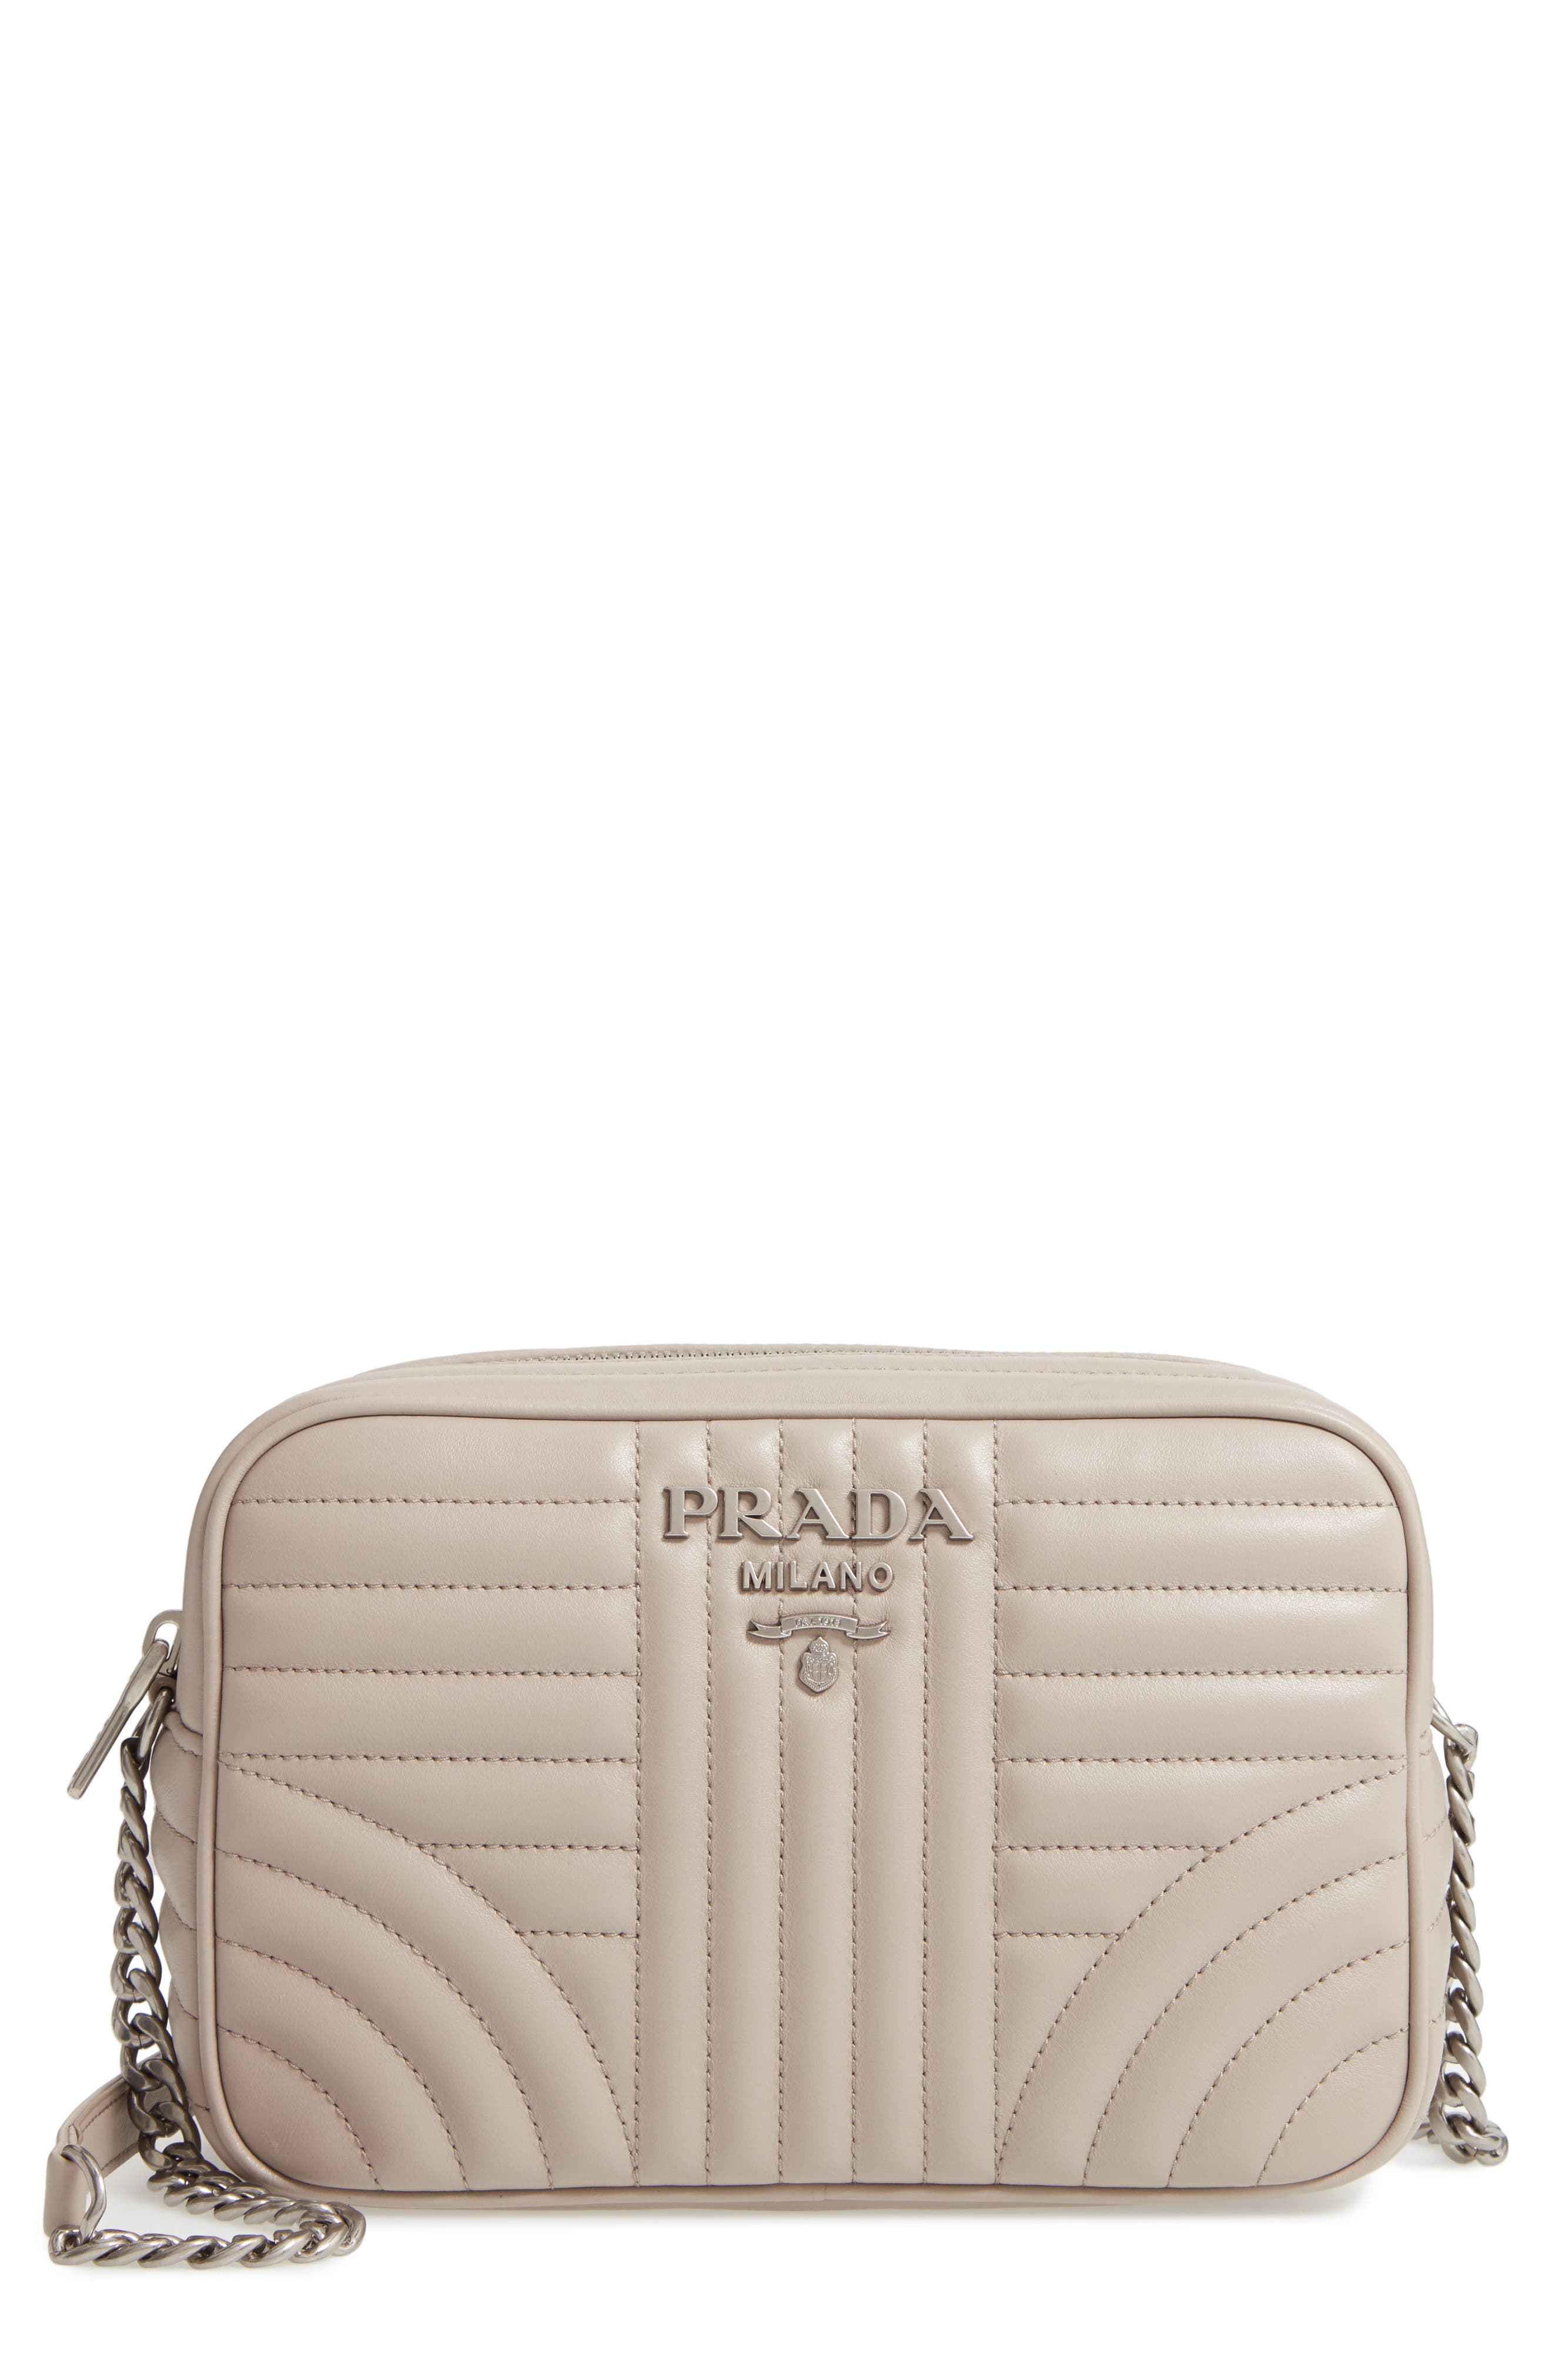 prada quilted leather camera bag